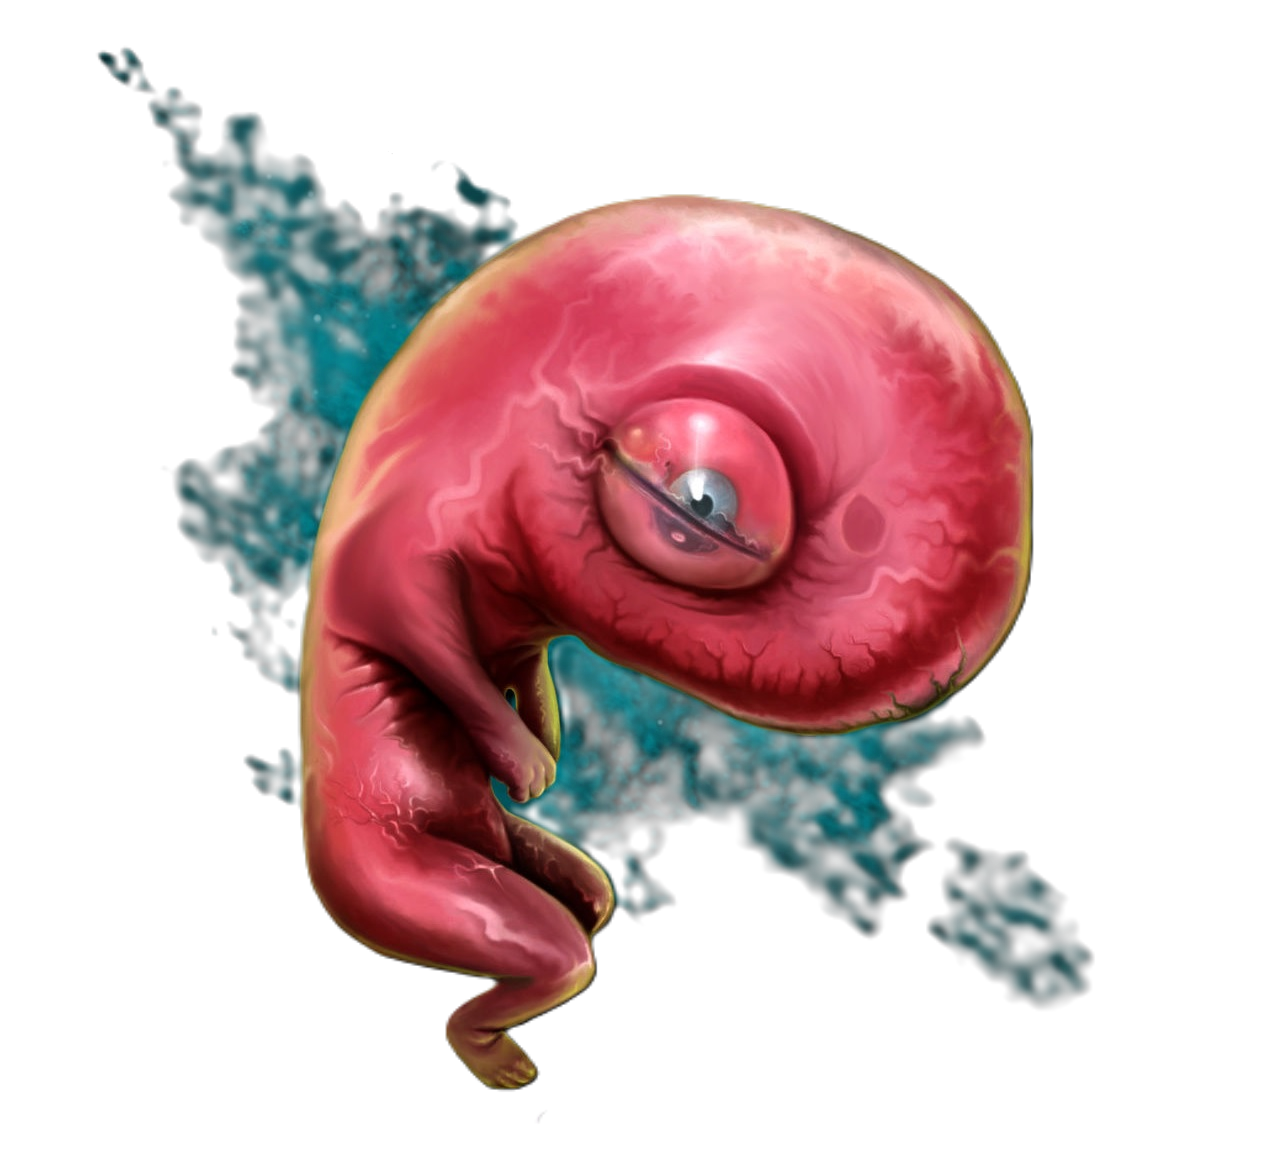 Fetoid: a body horror, psychosis induced, fevered dream of a side-scrolling space sim written by someone who has no idea what is going on anywhere.. ever.. it's really quite sad actually. This is their legacy, and those who have helped along the way, shall they be credited also? Time will tell. Help this alien fetus made of bubble game named Mz Billy-Bob navigate the cosmos, innerspace, and beyond in this gripping tale of mass genocide, herbicide, insecticide, famine, and the horrors of artificial intelligence when coupled with goodness knows what else. FREE TOY INSIDE FREE TOY INSIDE! PC Only. For now.......